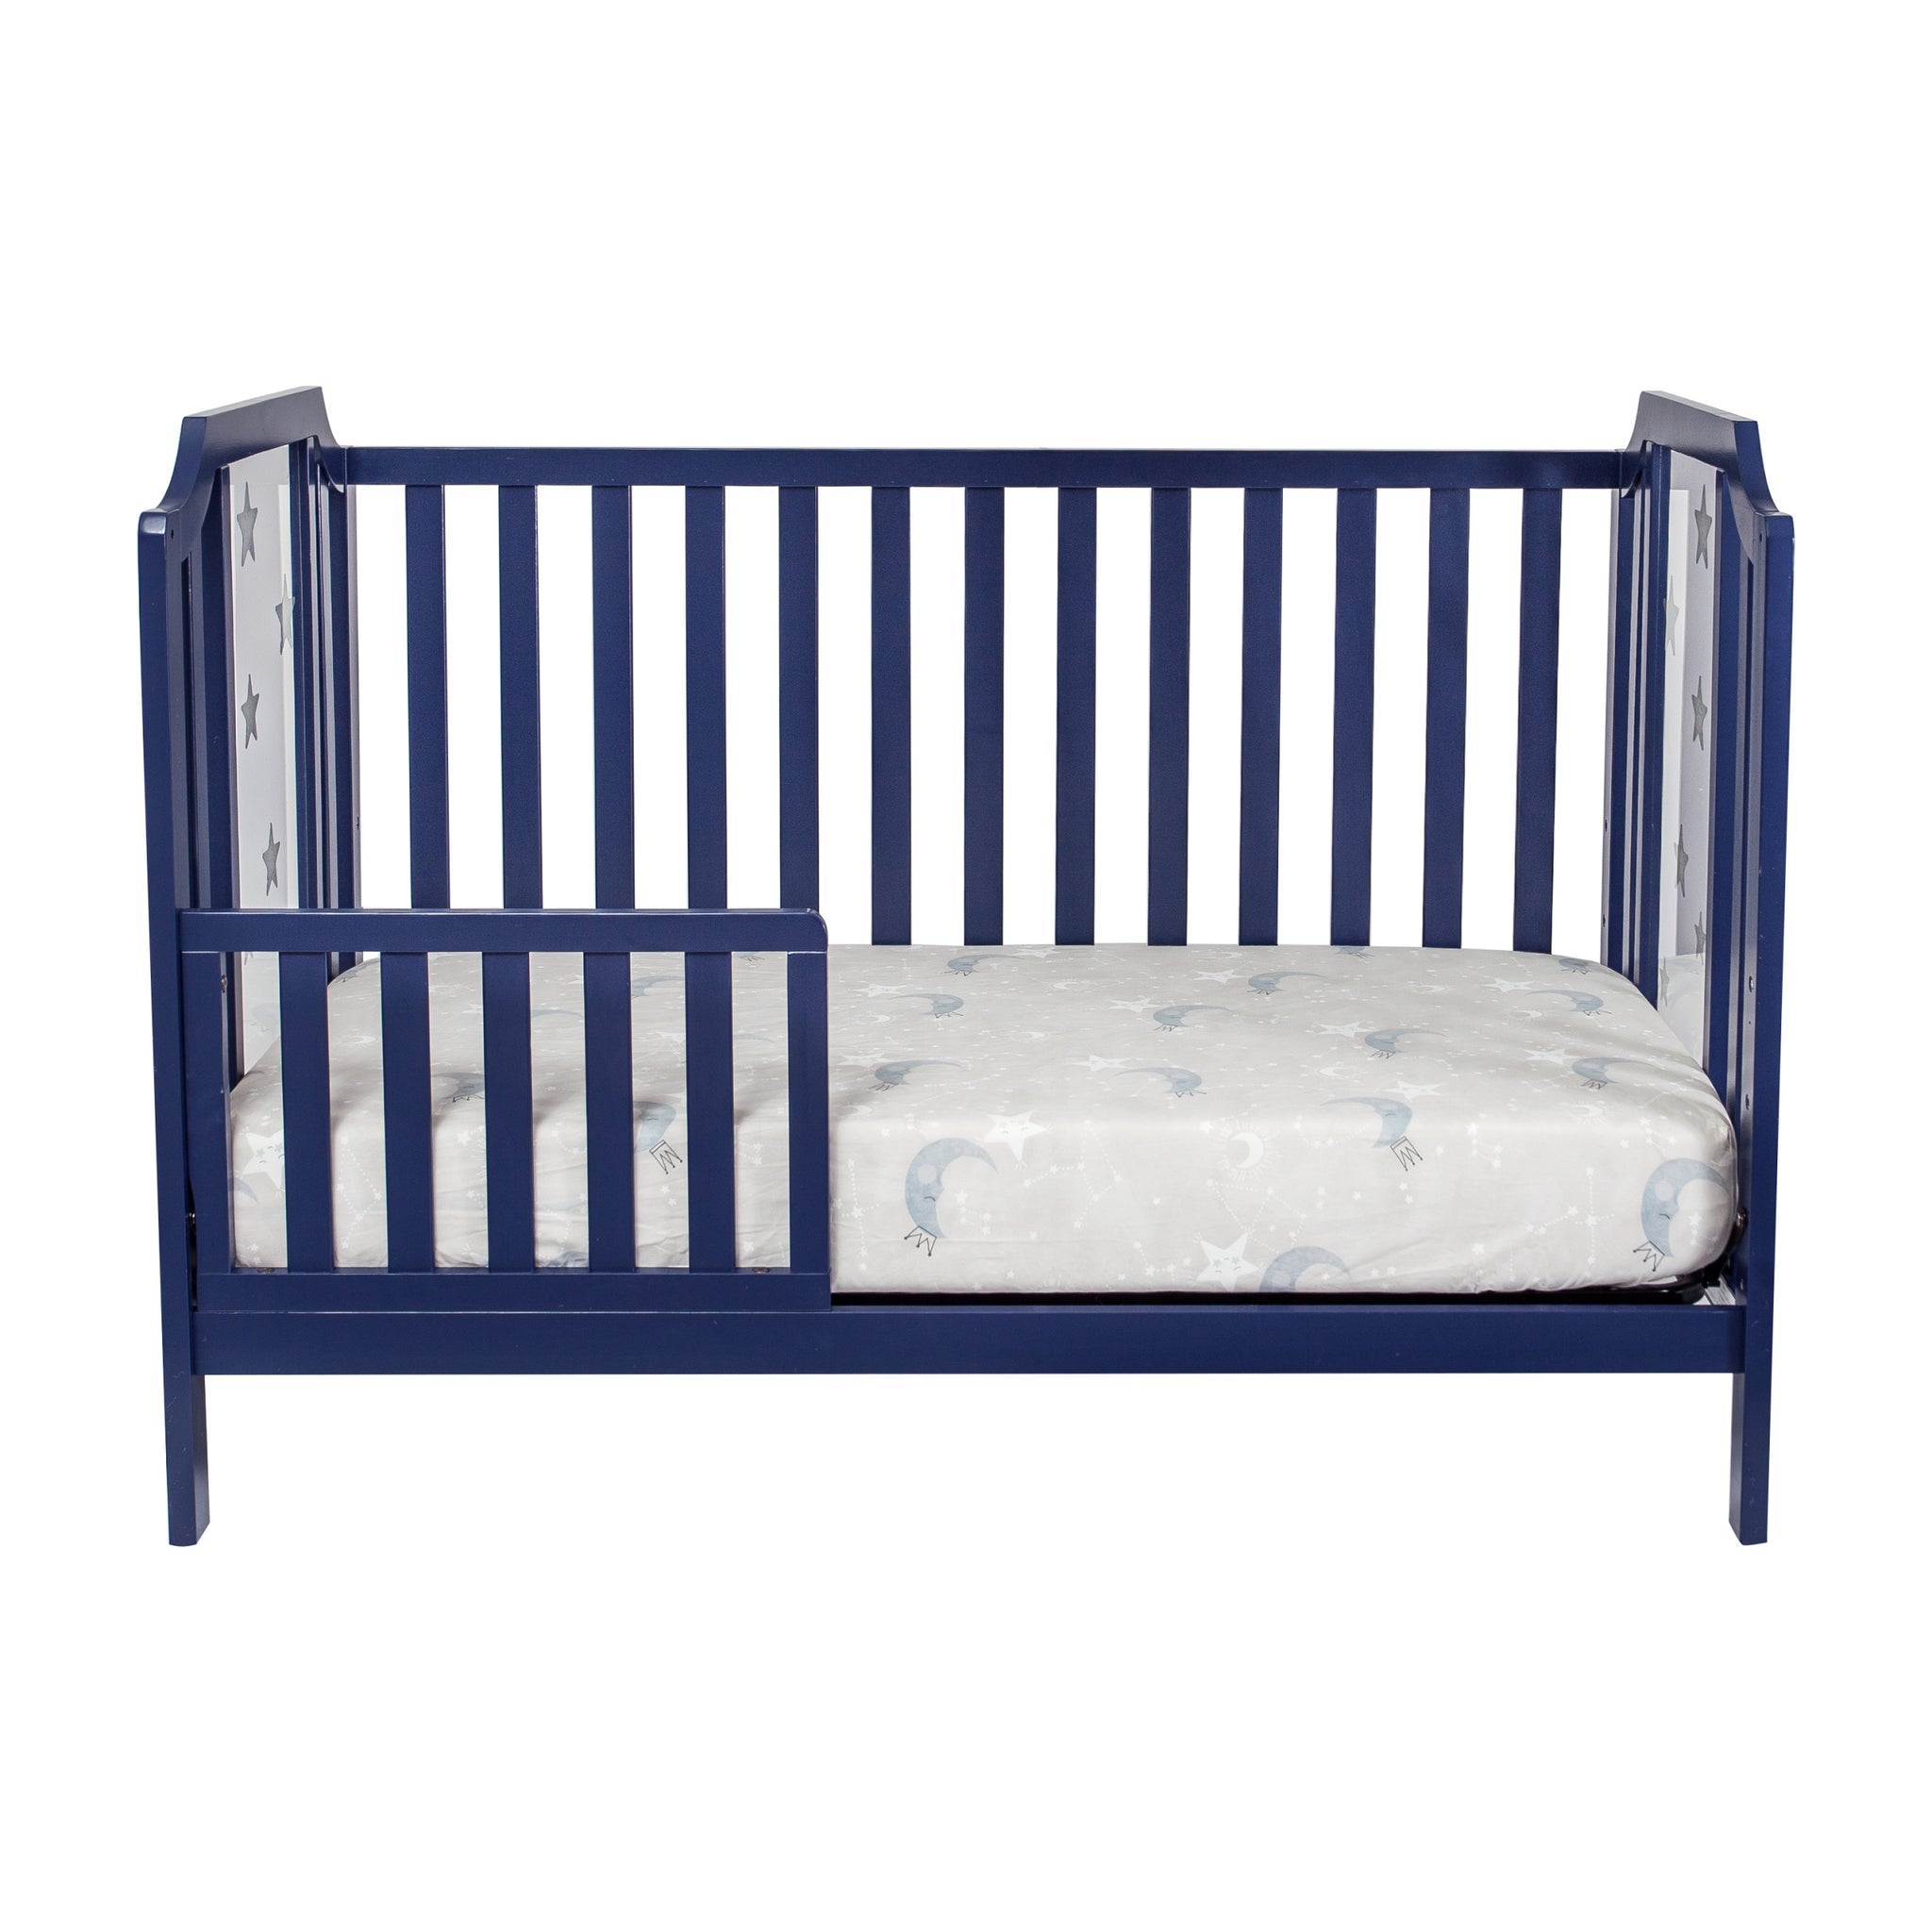 Celeste 3 in 1 Convertible Island Crib Navy Blue navy blue-solid wood